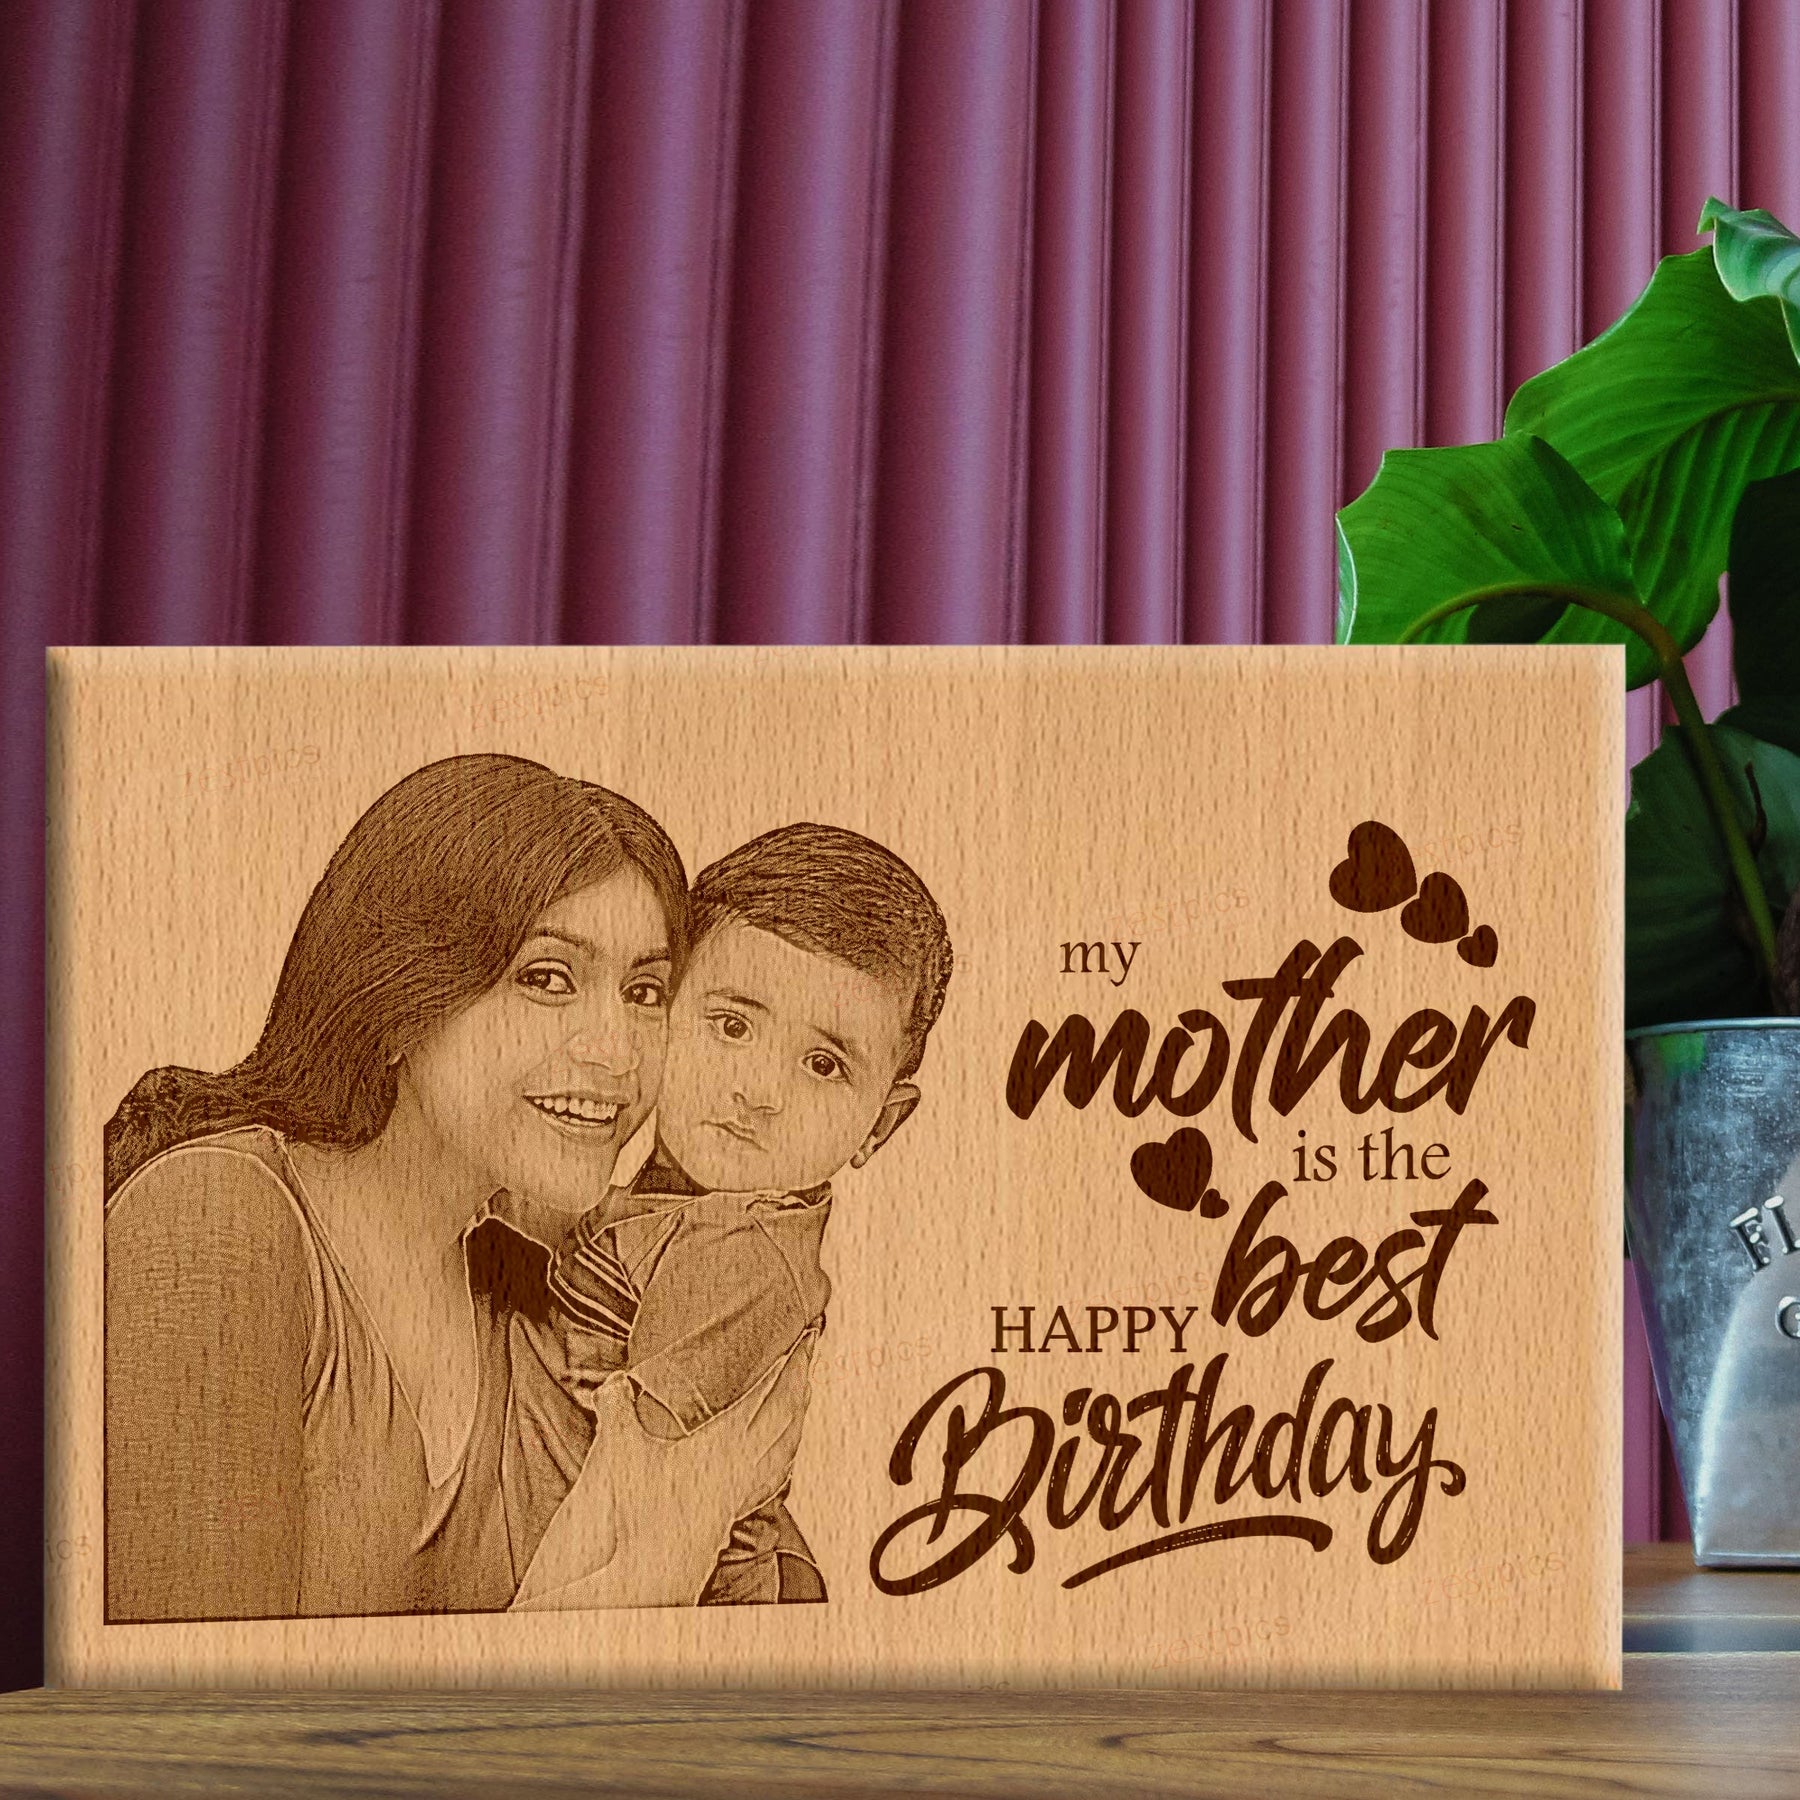 Gifts For Mother-In-Law | Send Best Gifts For Mother-In-Law Online in India